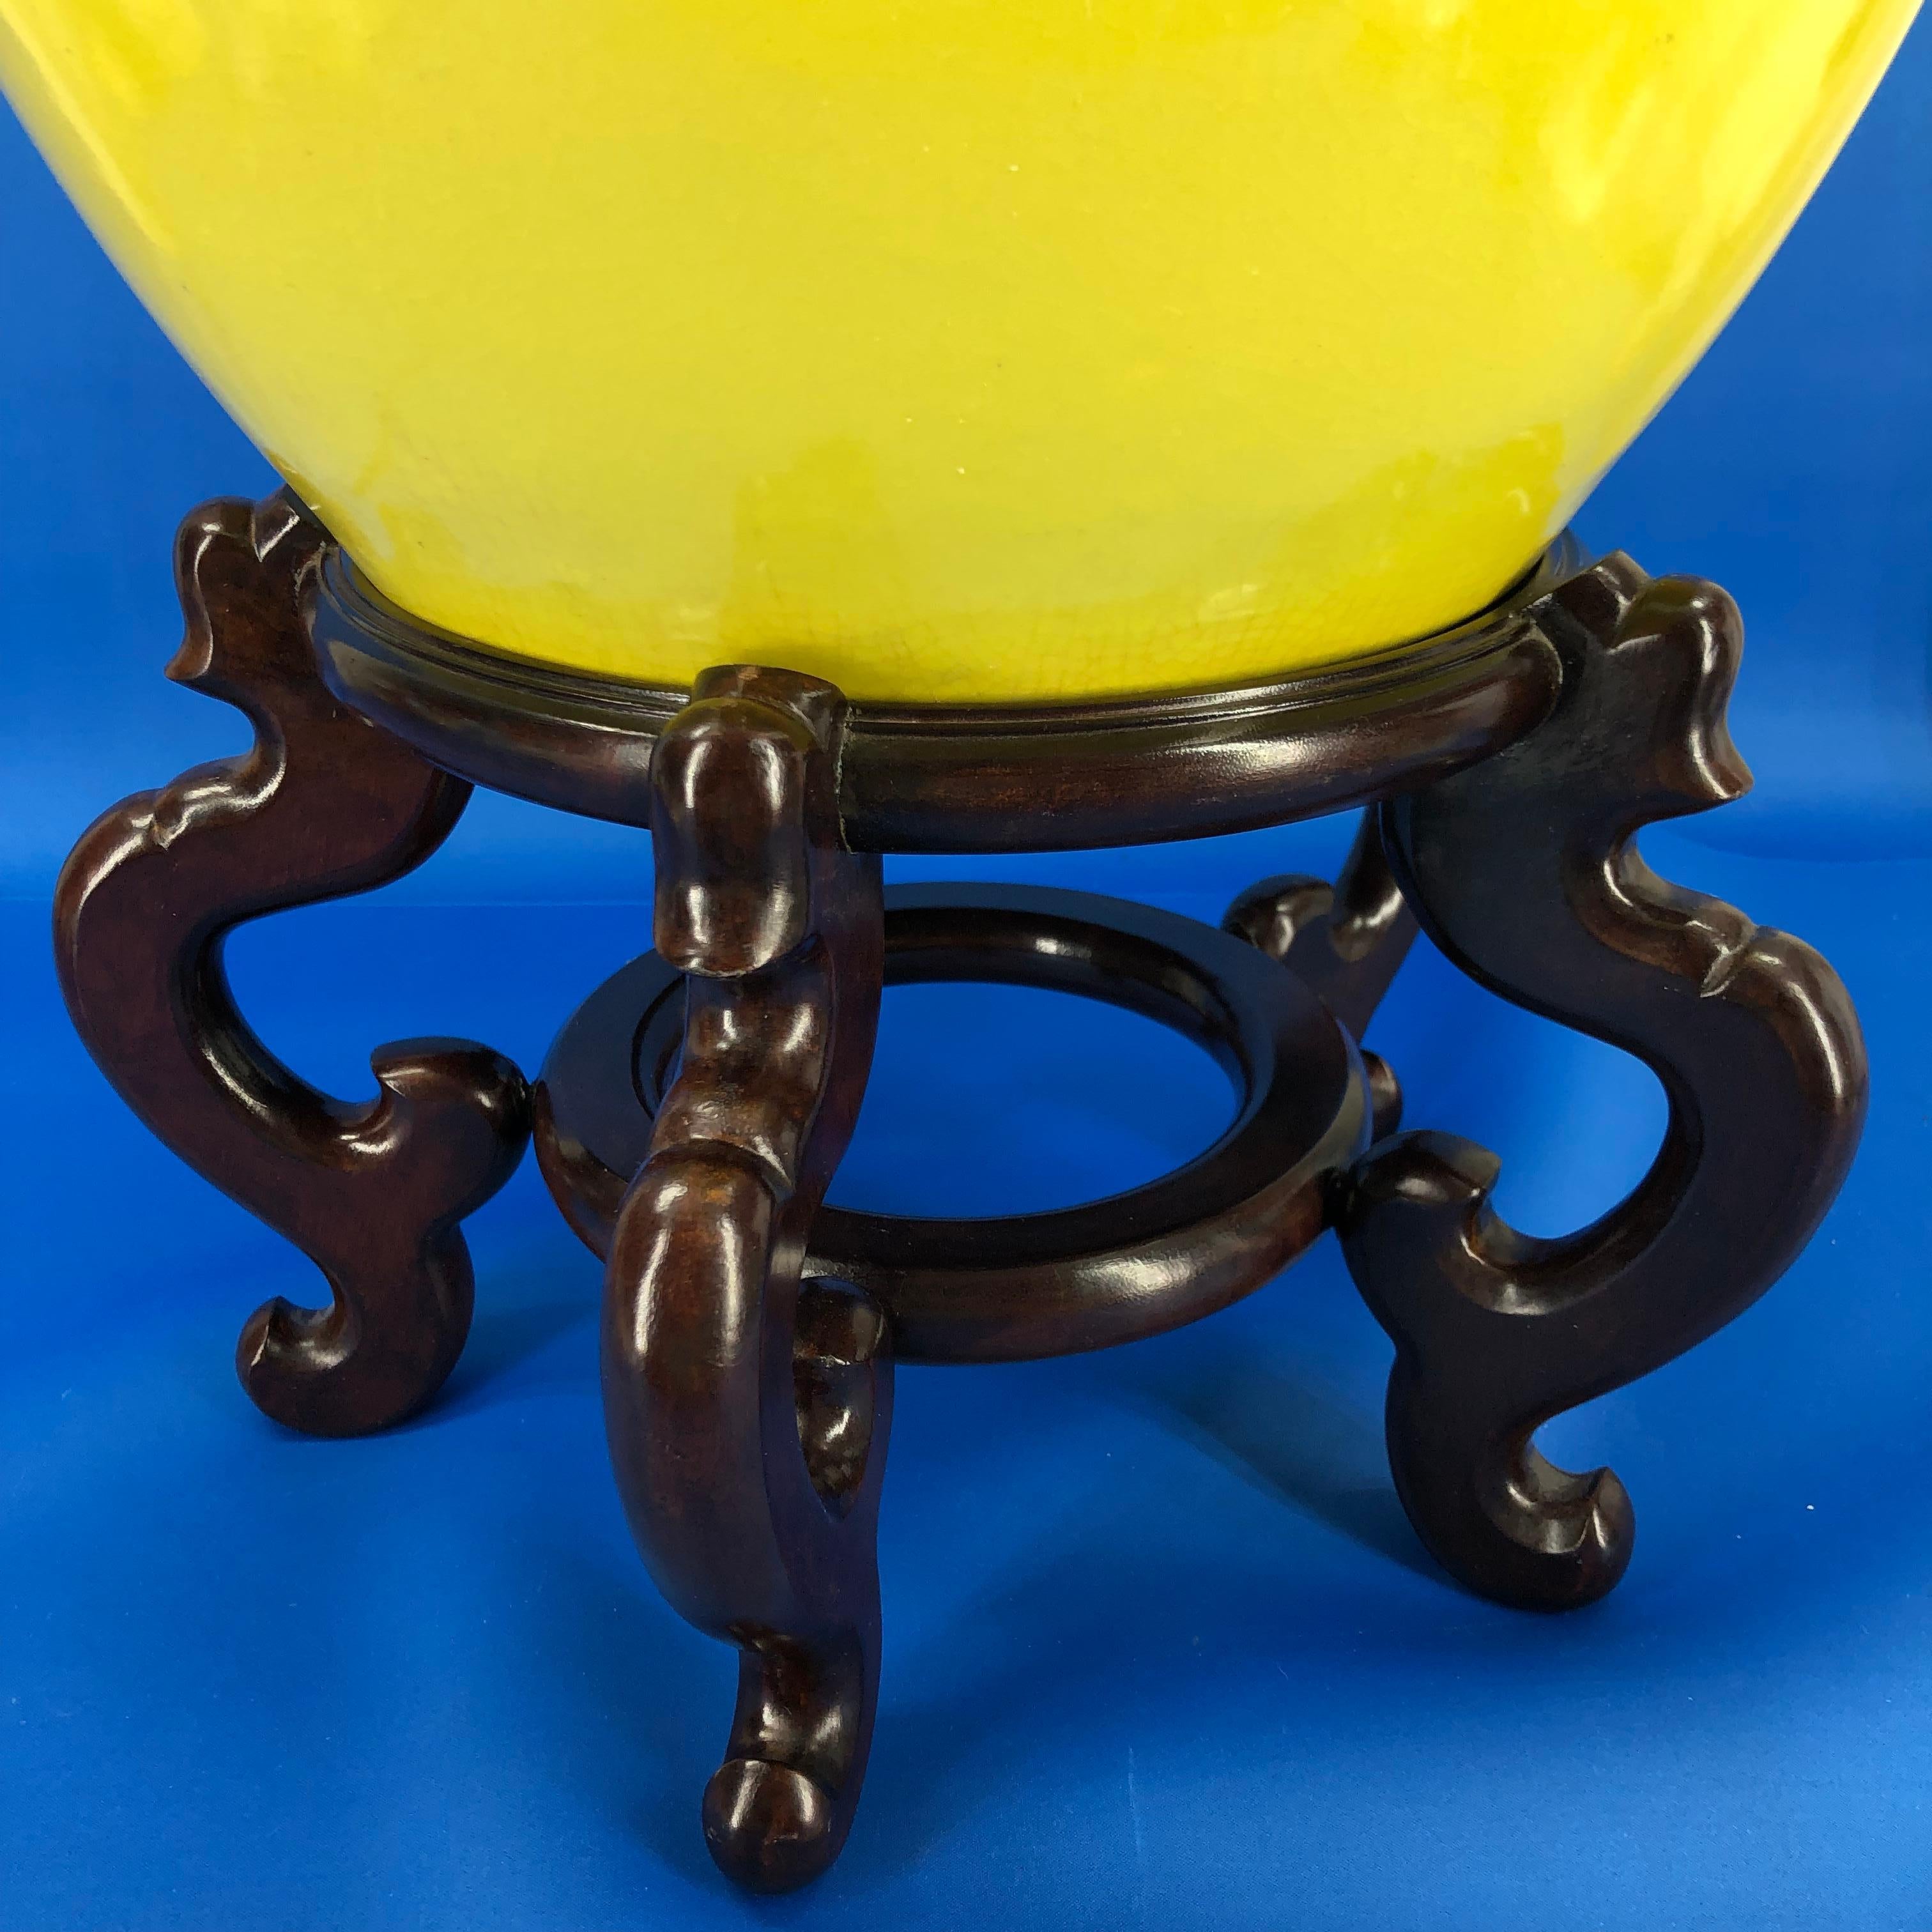 Large Bright Yellow Hand Painted Porcelain Jardinière Bowl on a Wooden Stand For Sale 2